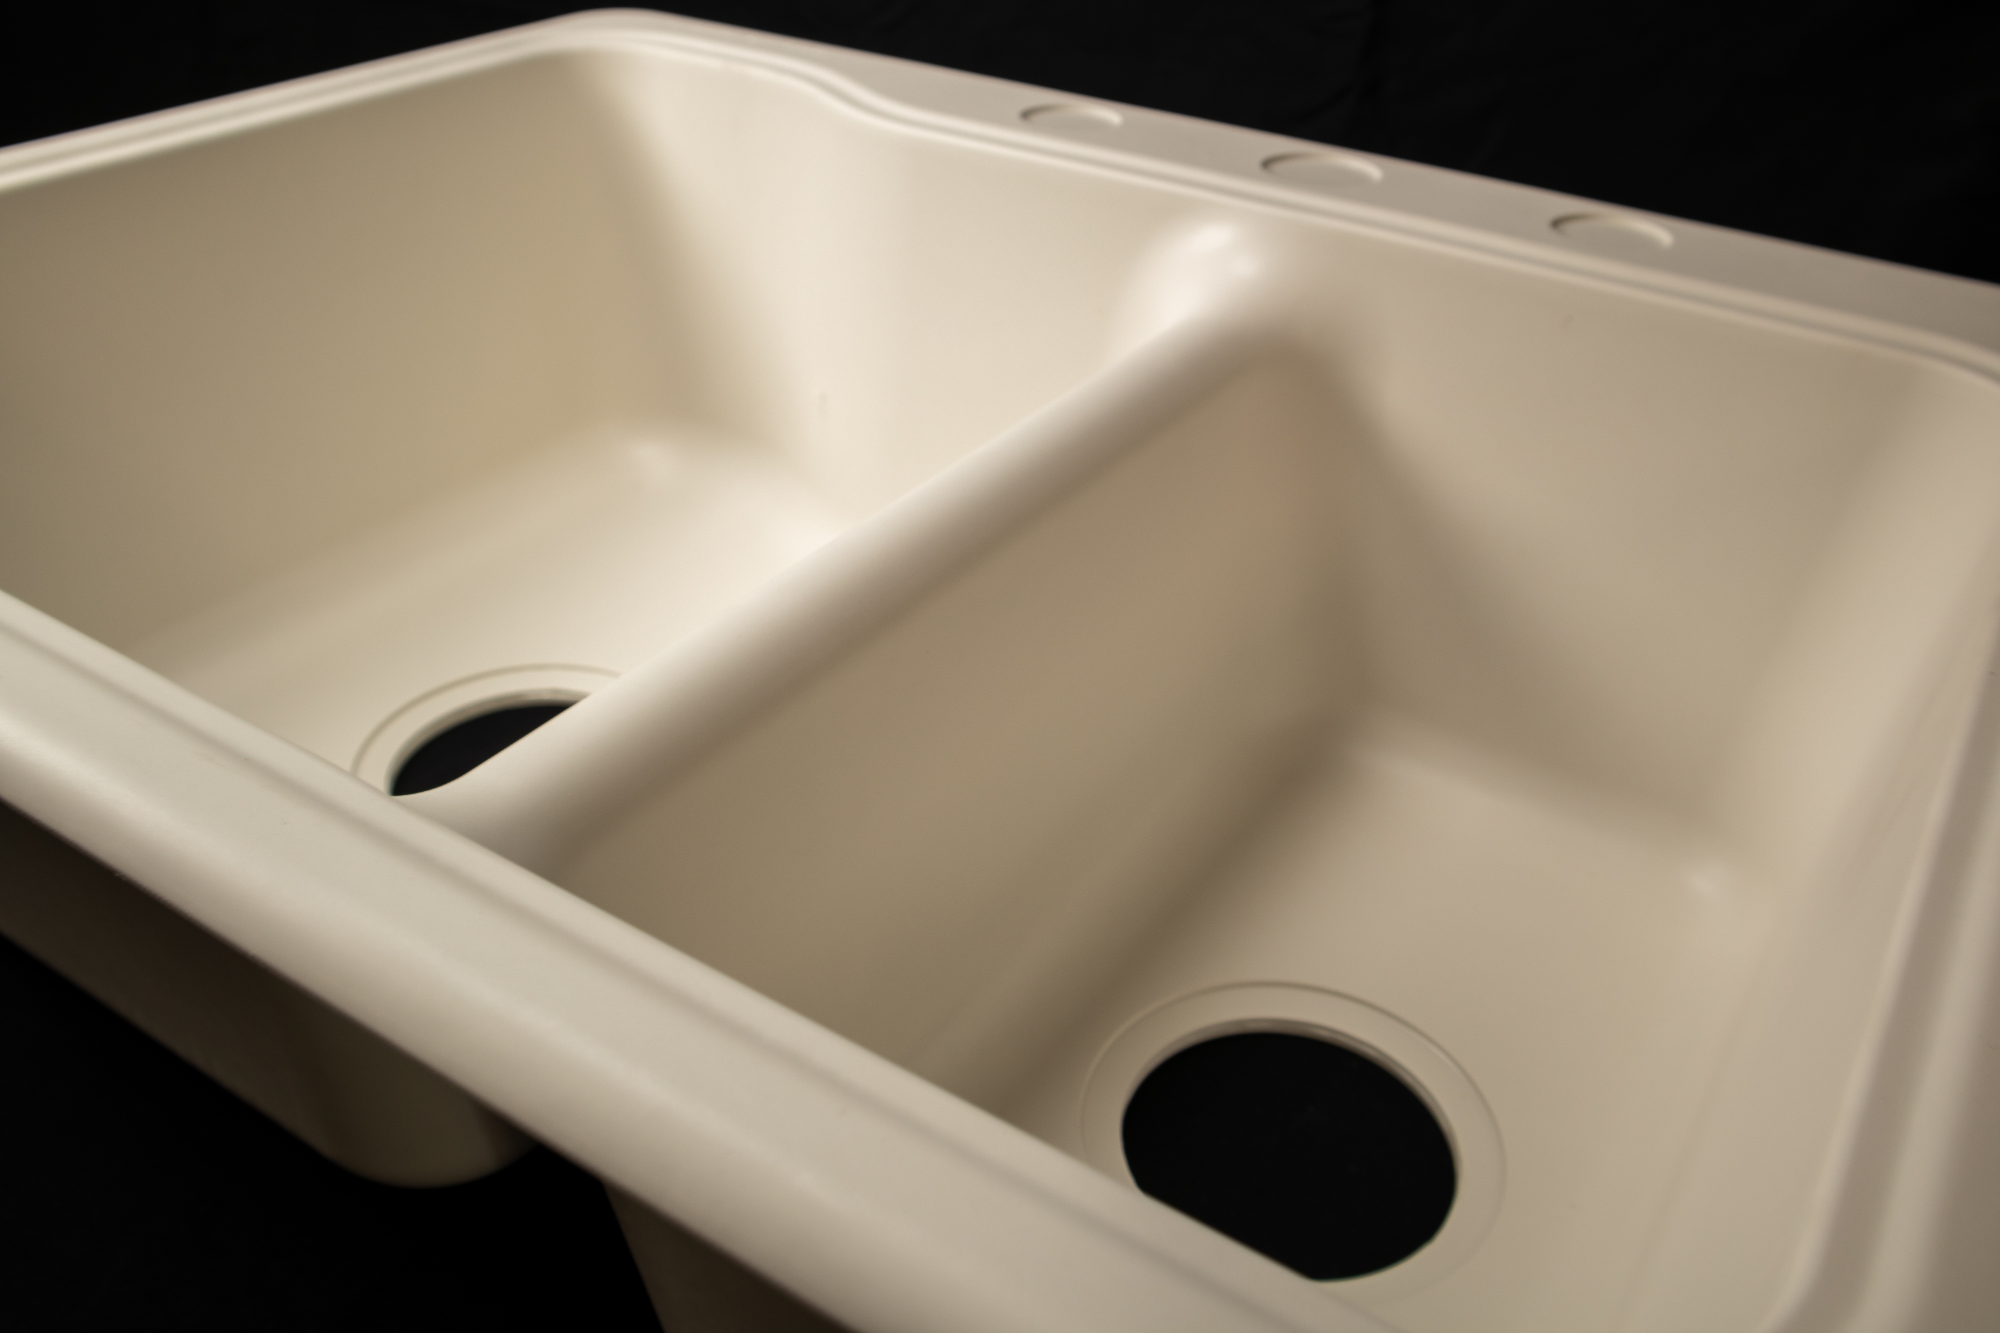 1925, 60/40 Kitchen Sink Covers - Cream - American Stonecast Products, Inc.